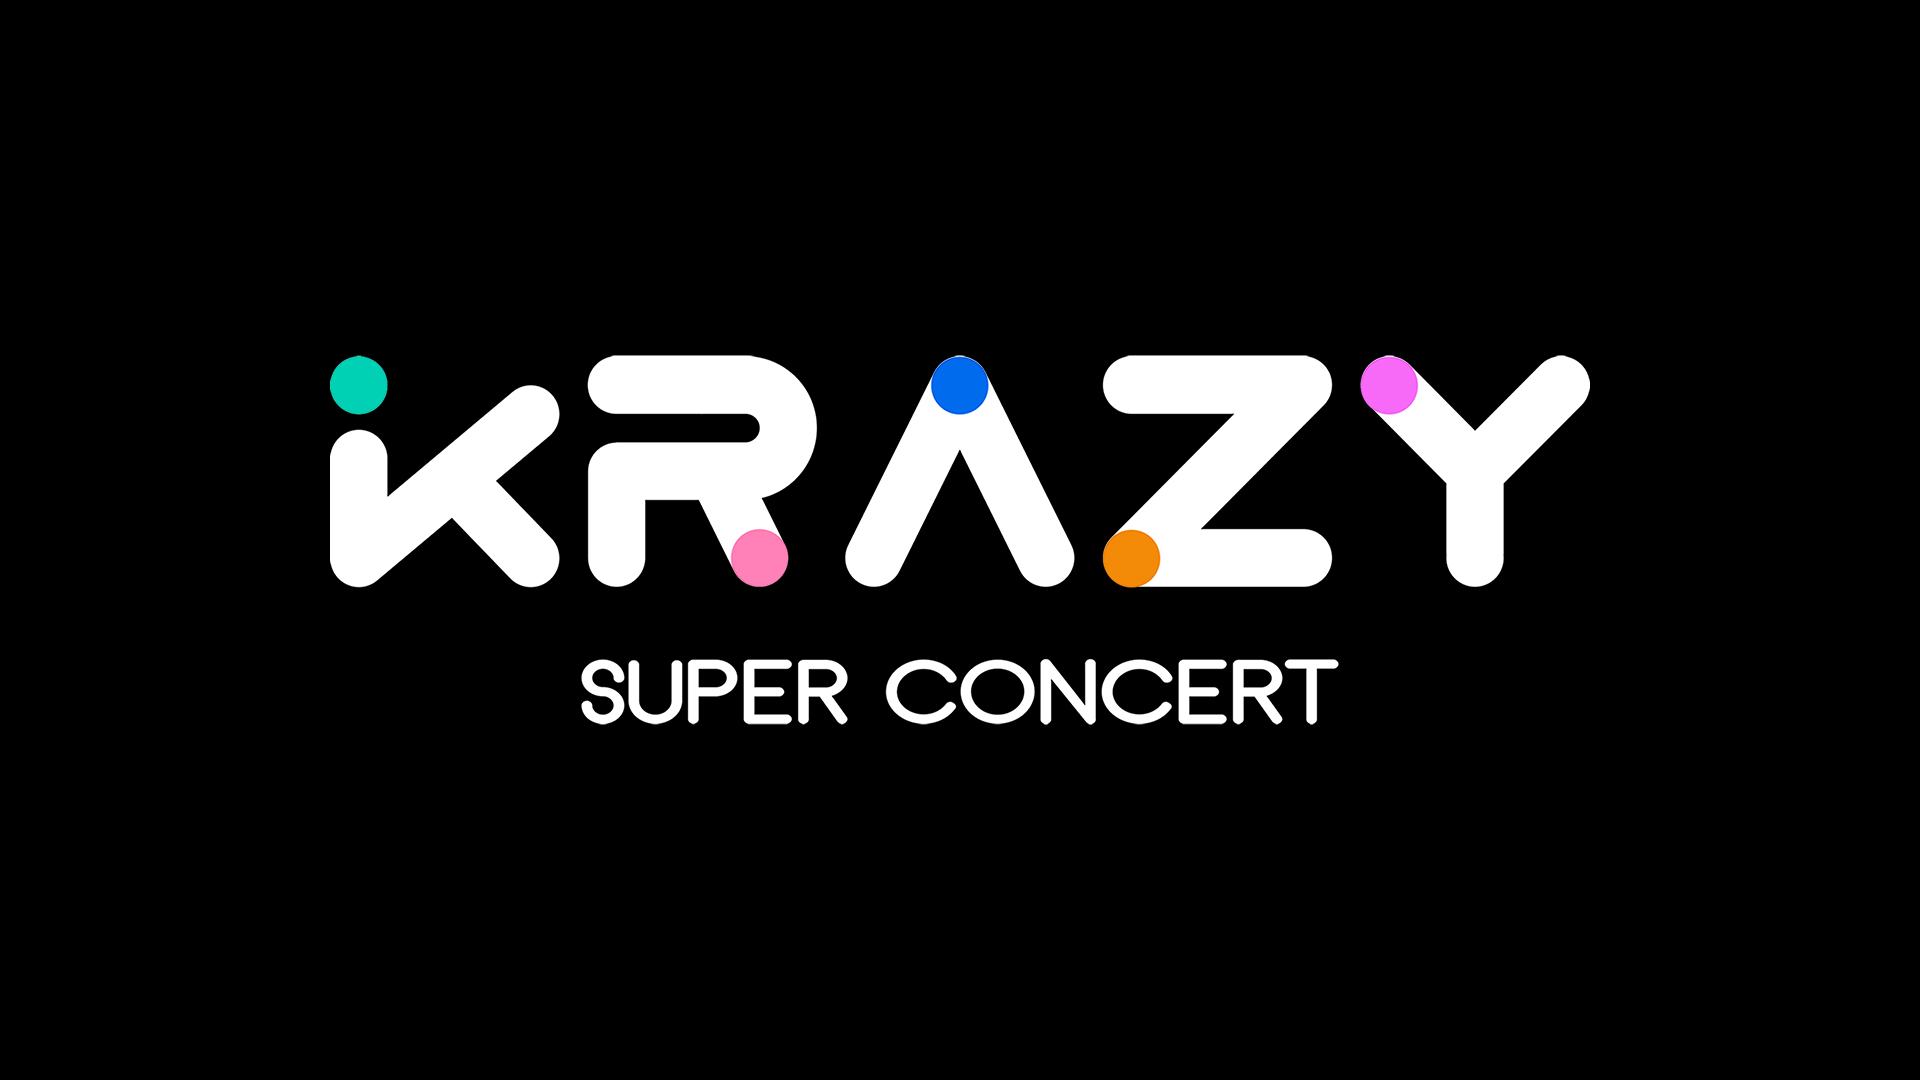 Krazy Super Concert 2024 Has Been Postponed, Yours Truly, The Kid Laroi, February 28, 2024